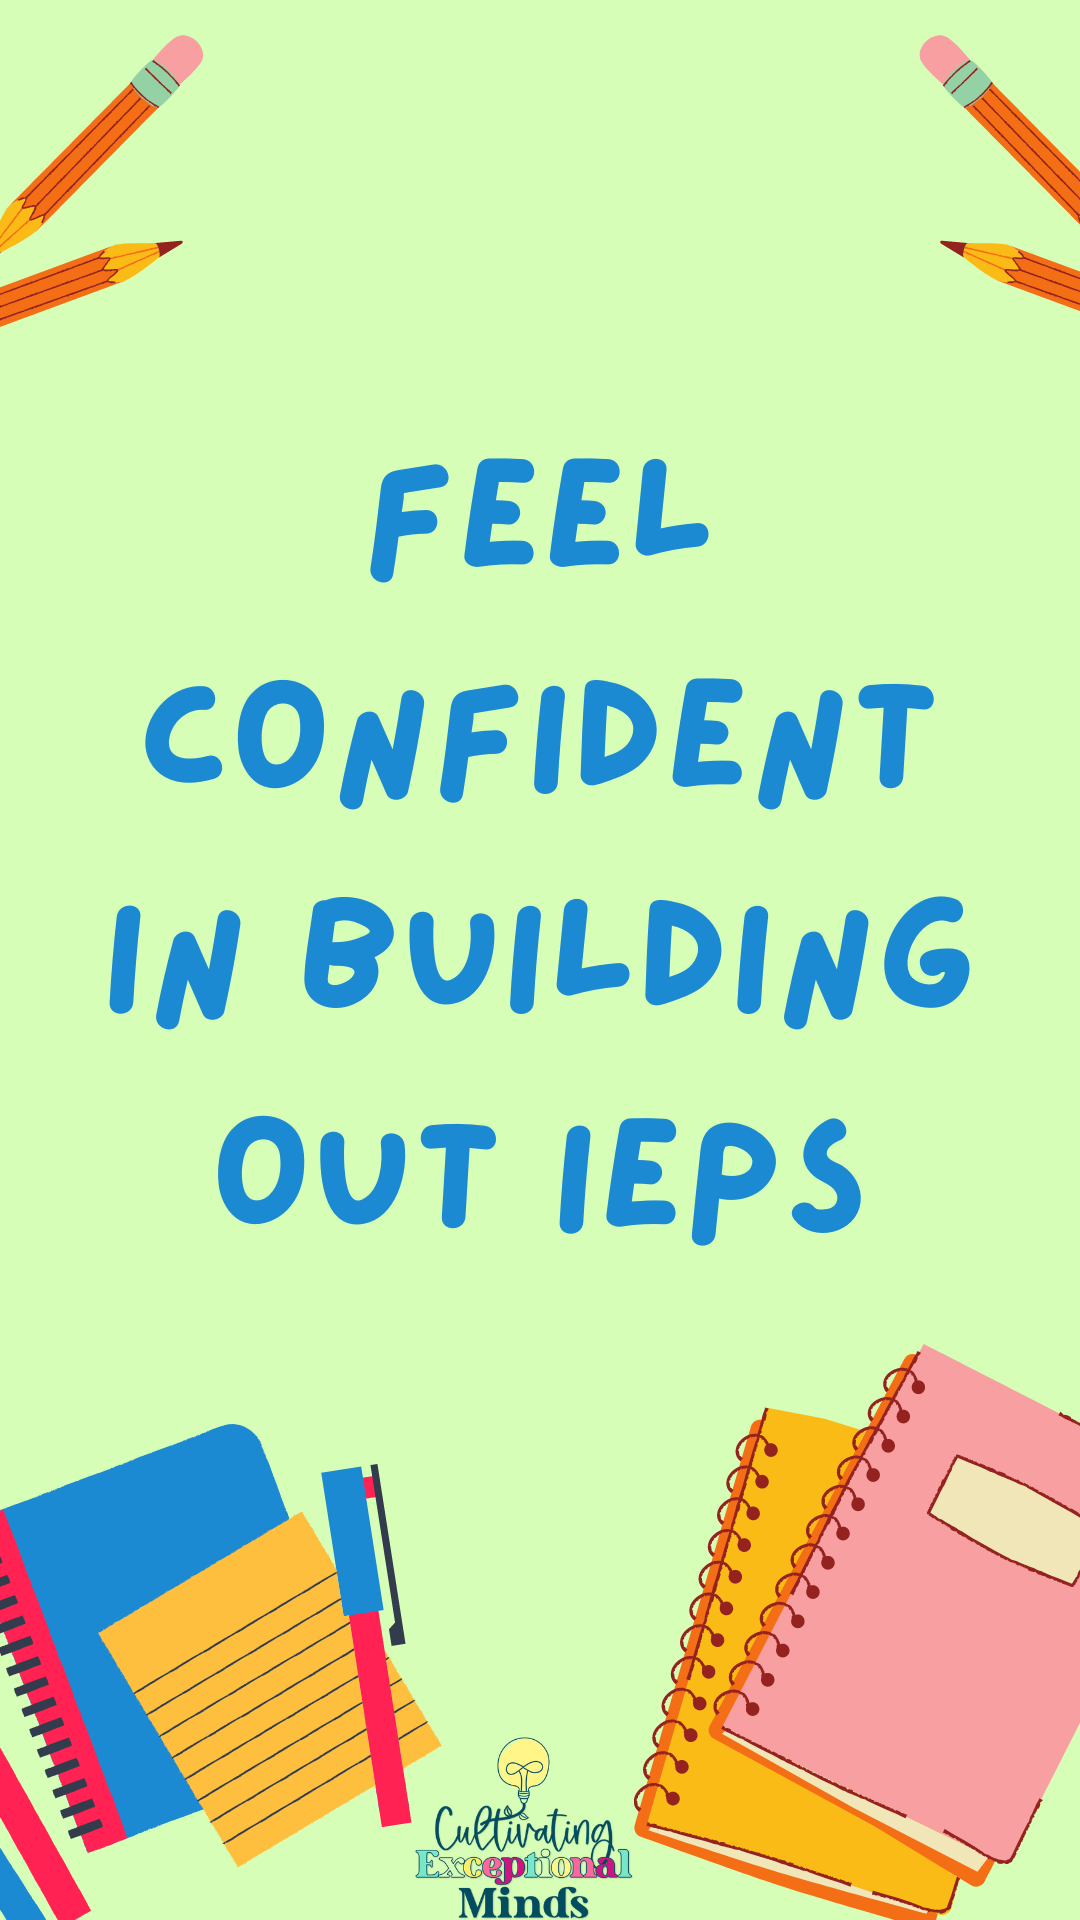 Feel Confident in Building Out IEPs